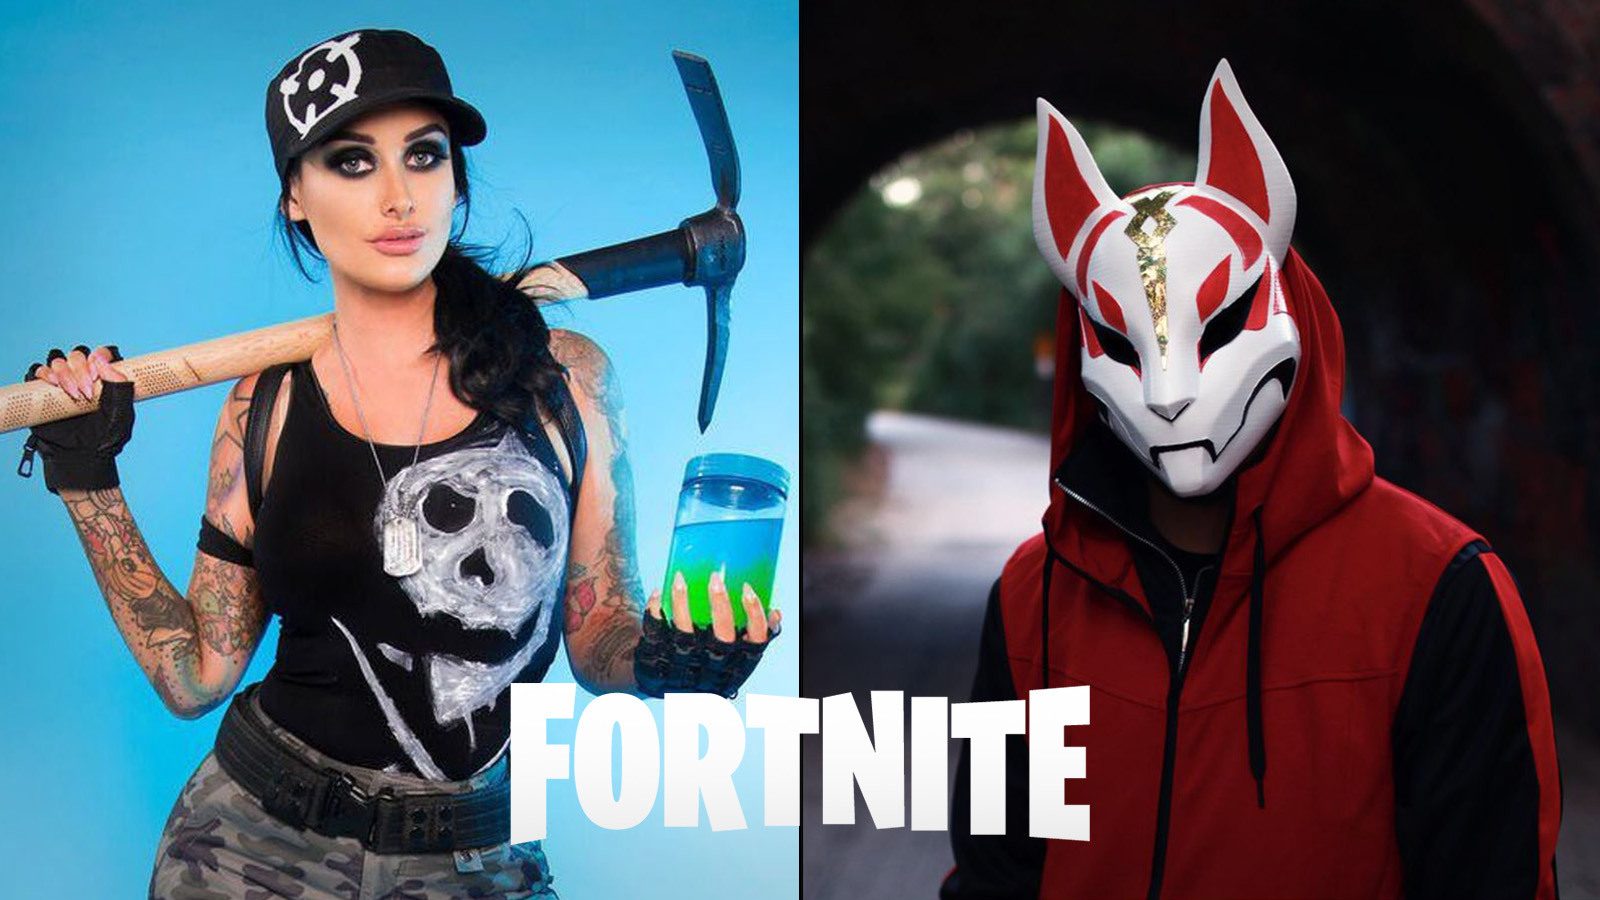 Top 10 Best Fortnite Cosplays – Brite Bomber, Valkyrie, Drift, and more -  Dexerto